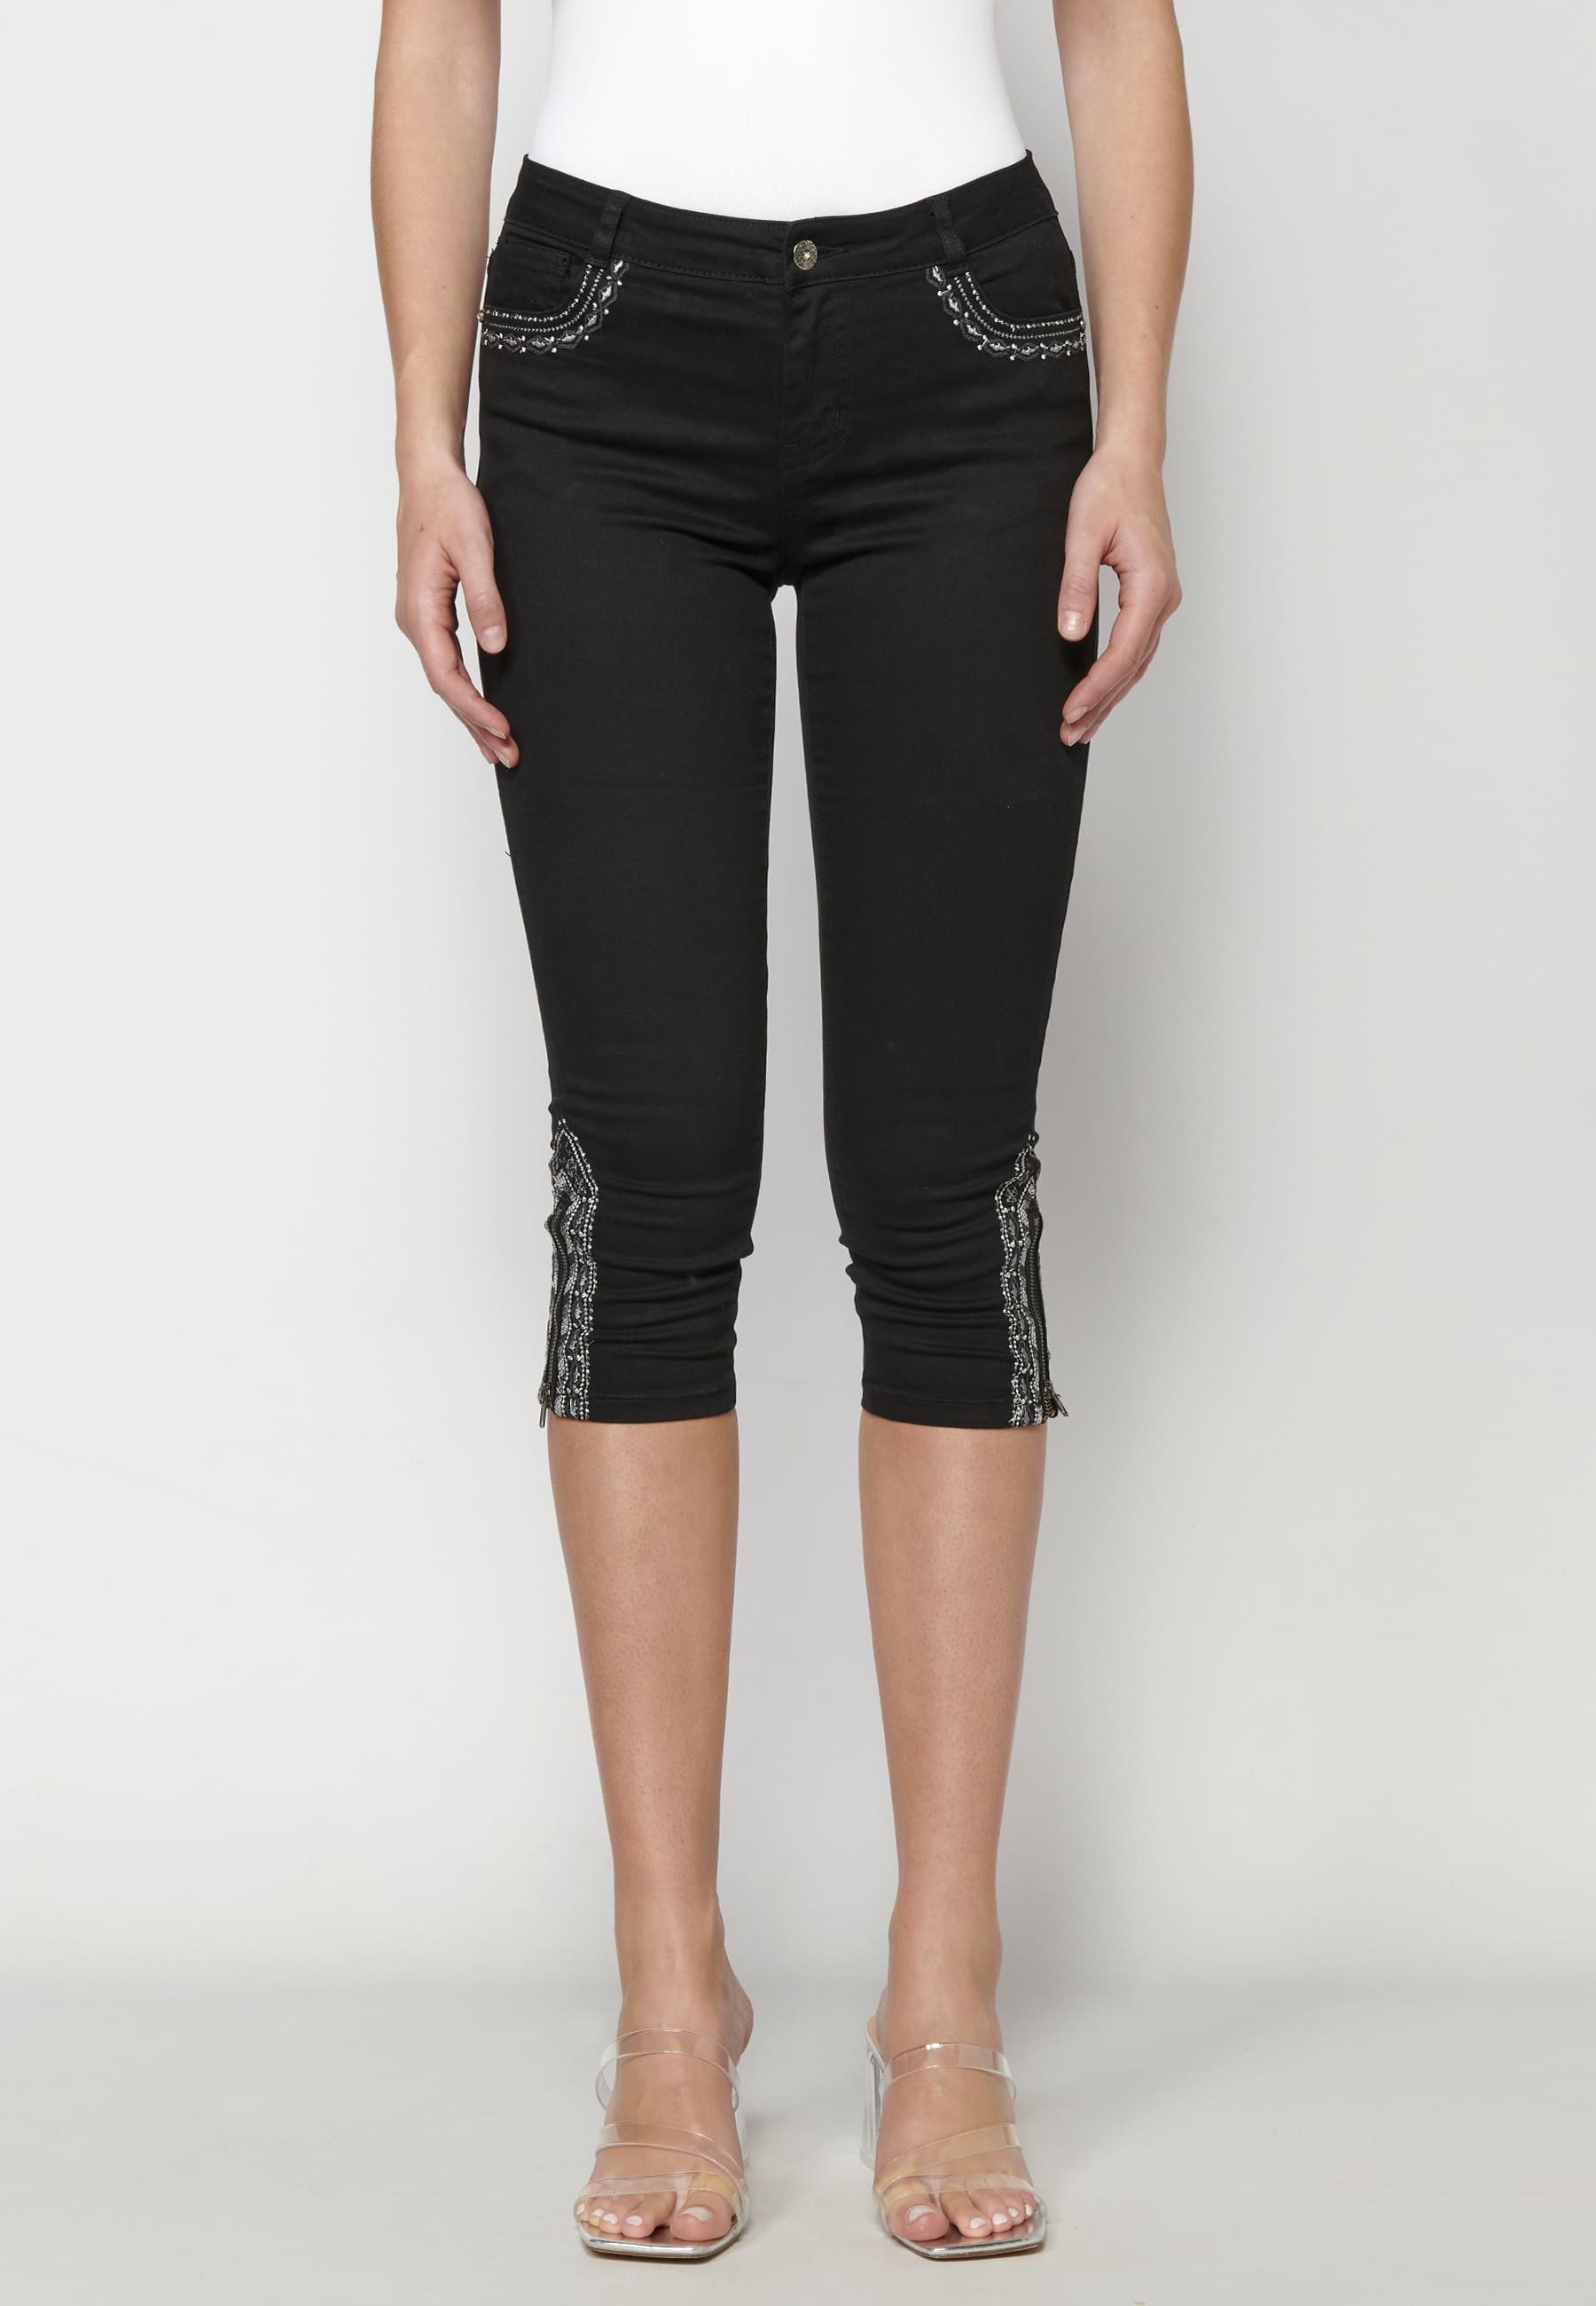 Black pirate pants with ethnic embroidery for Woman 1